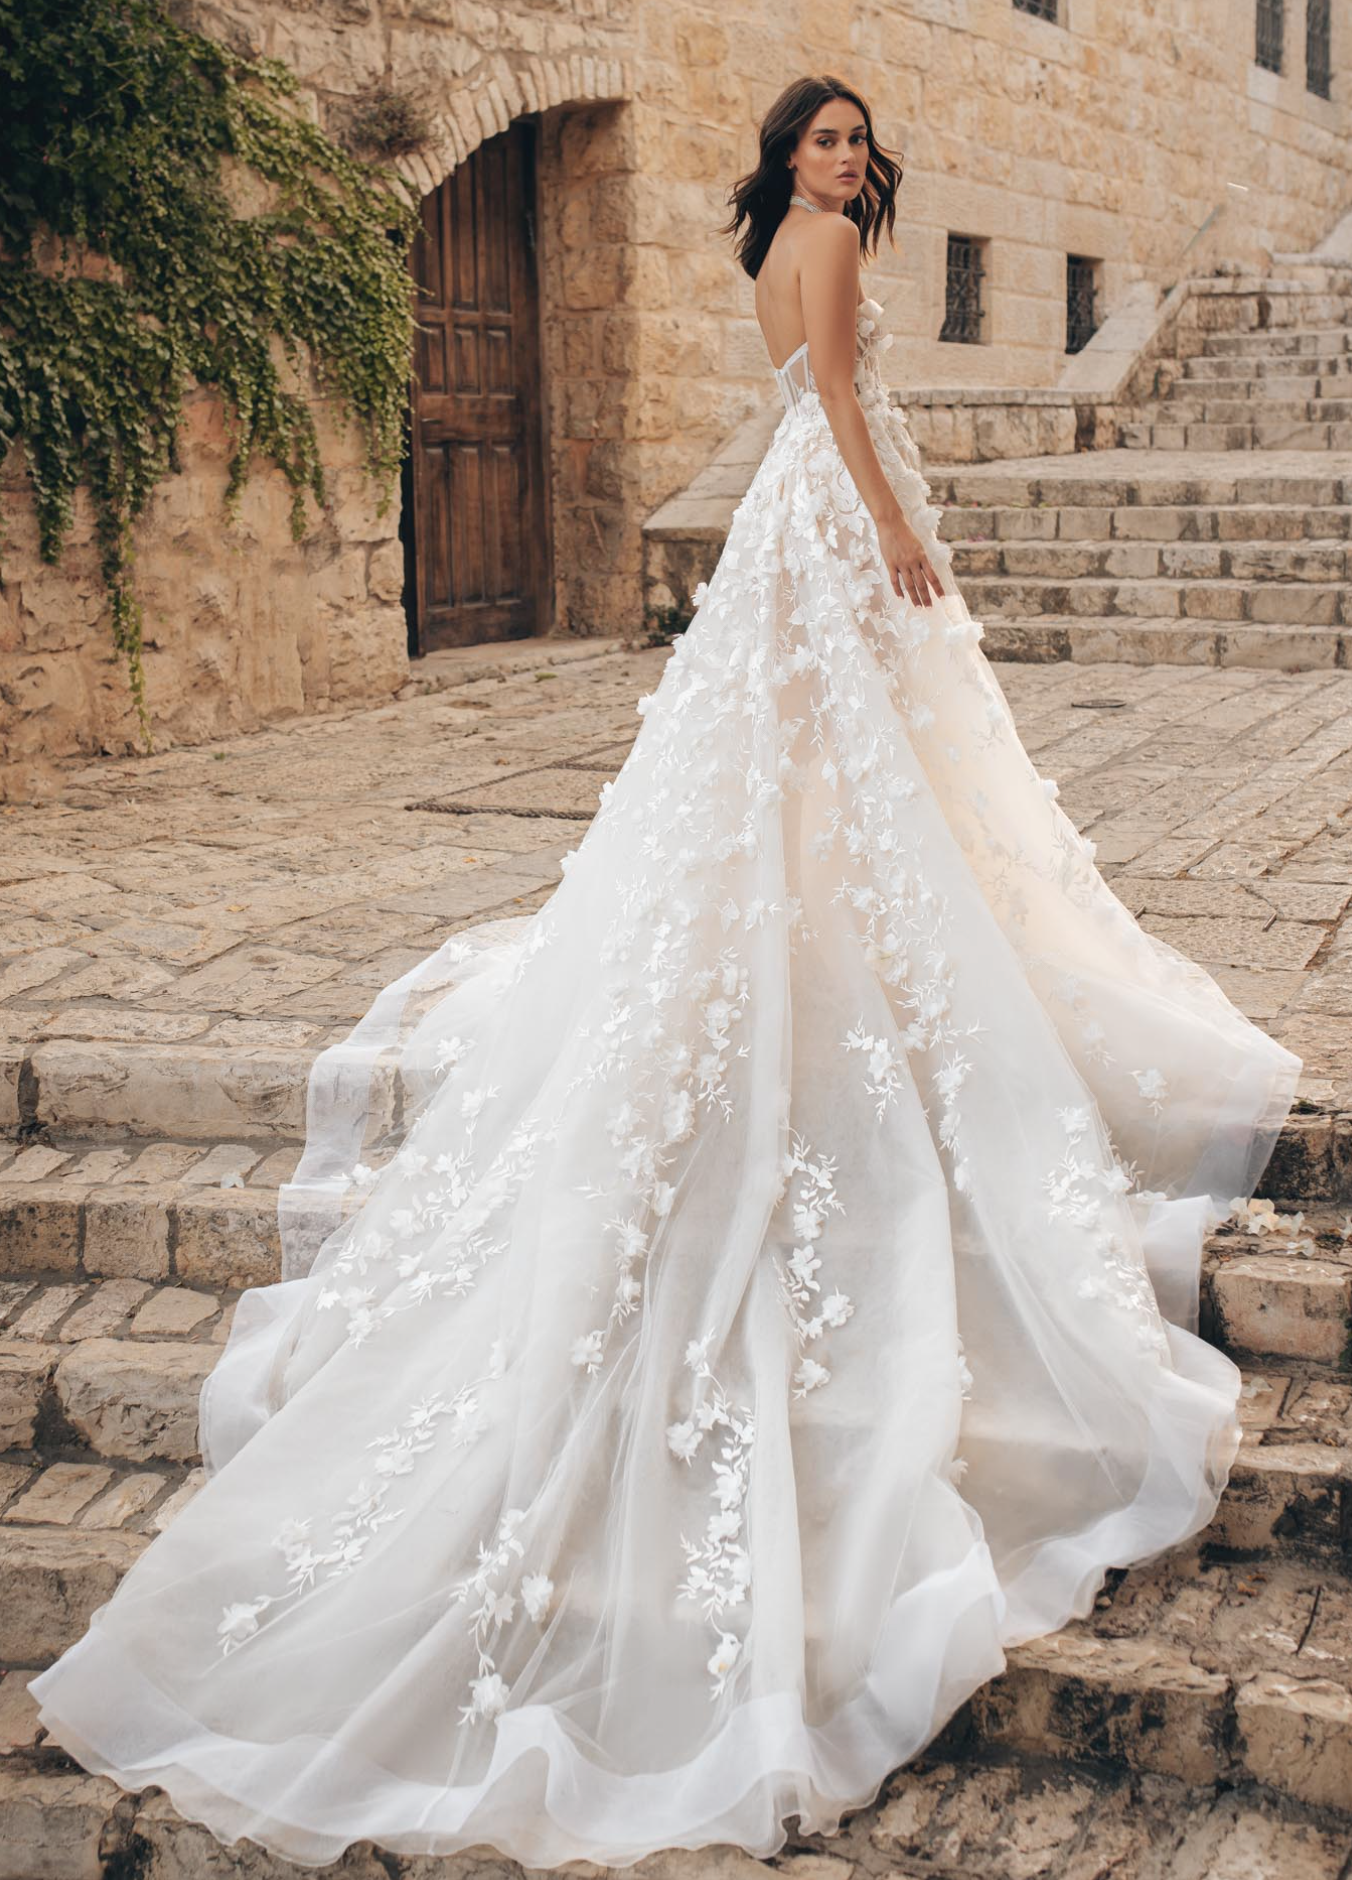 A bride wears a Berta wedding gown that has a flowy skirt with 3D embellished flowers stitched onto it.